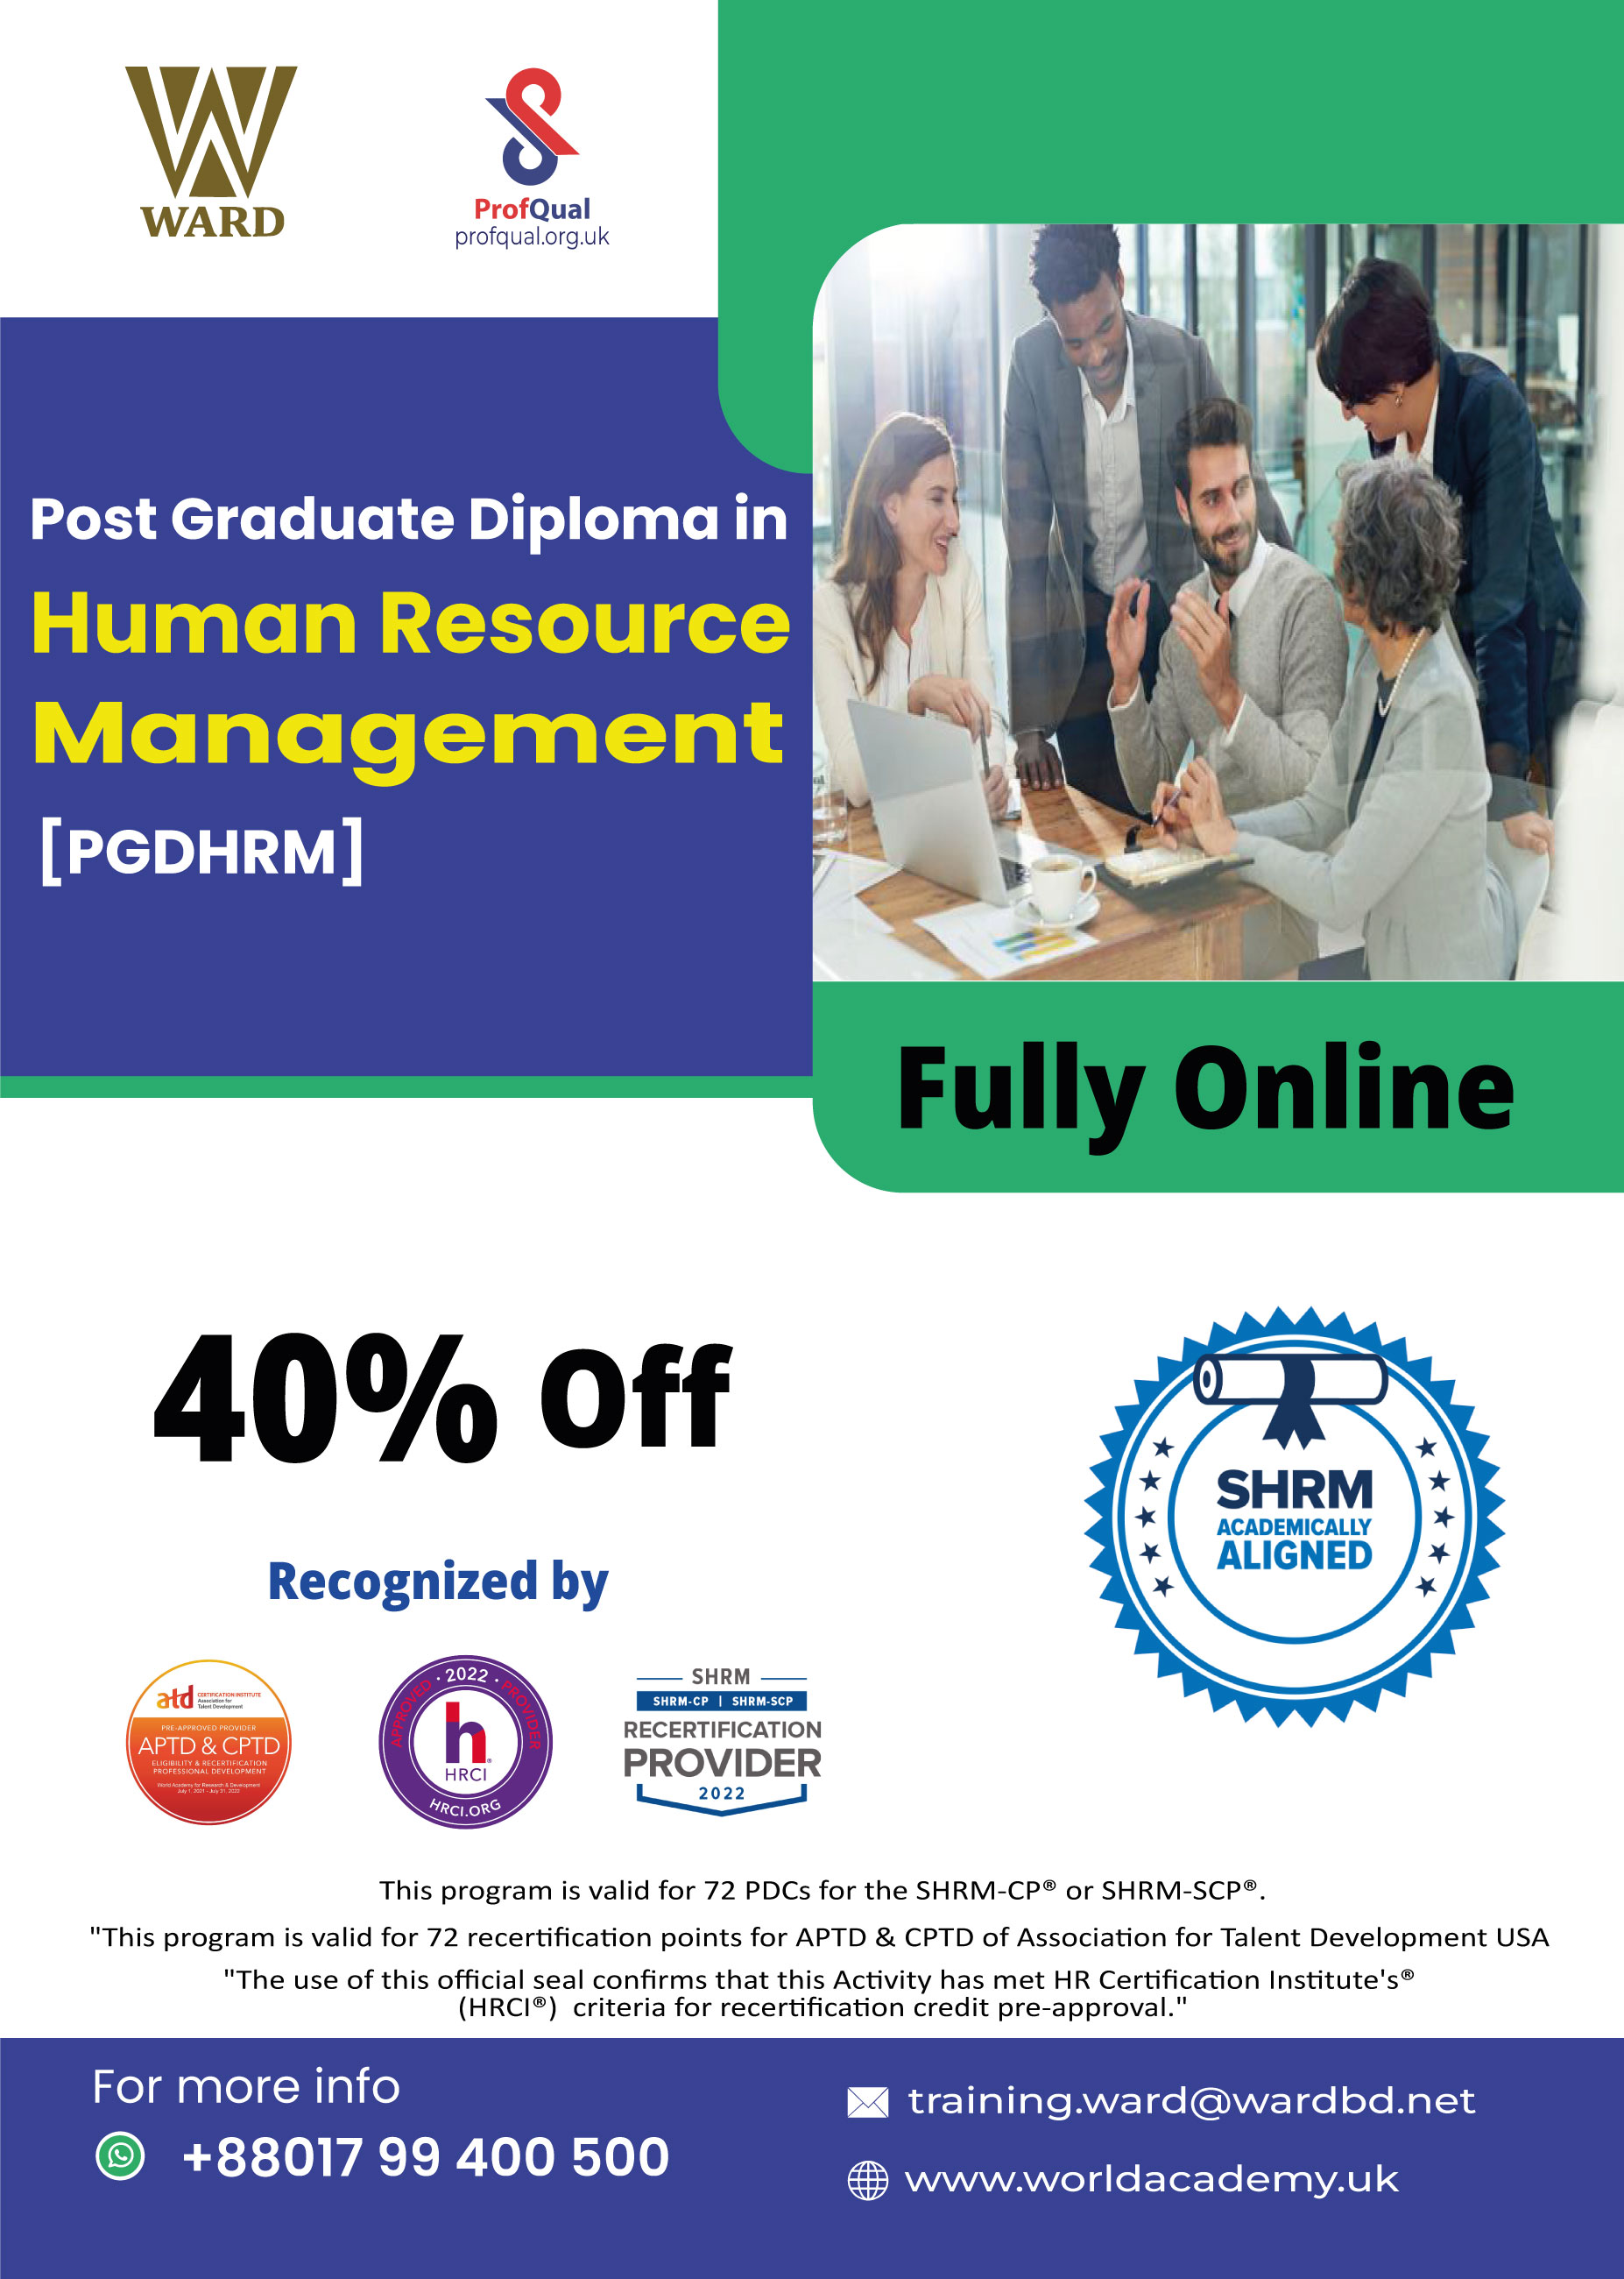 Post Graduate Diploma in Human Resource Management (PGDHRM)-Fully Online